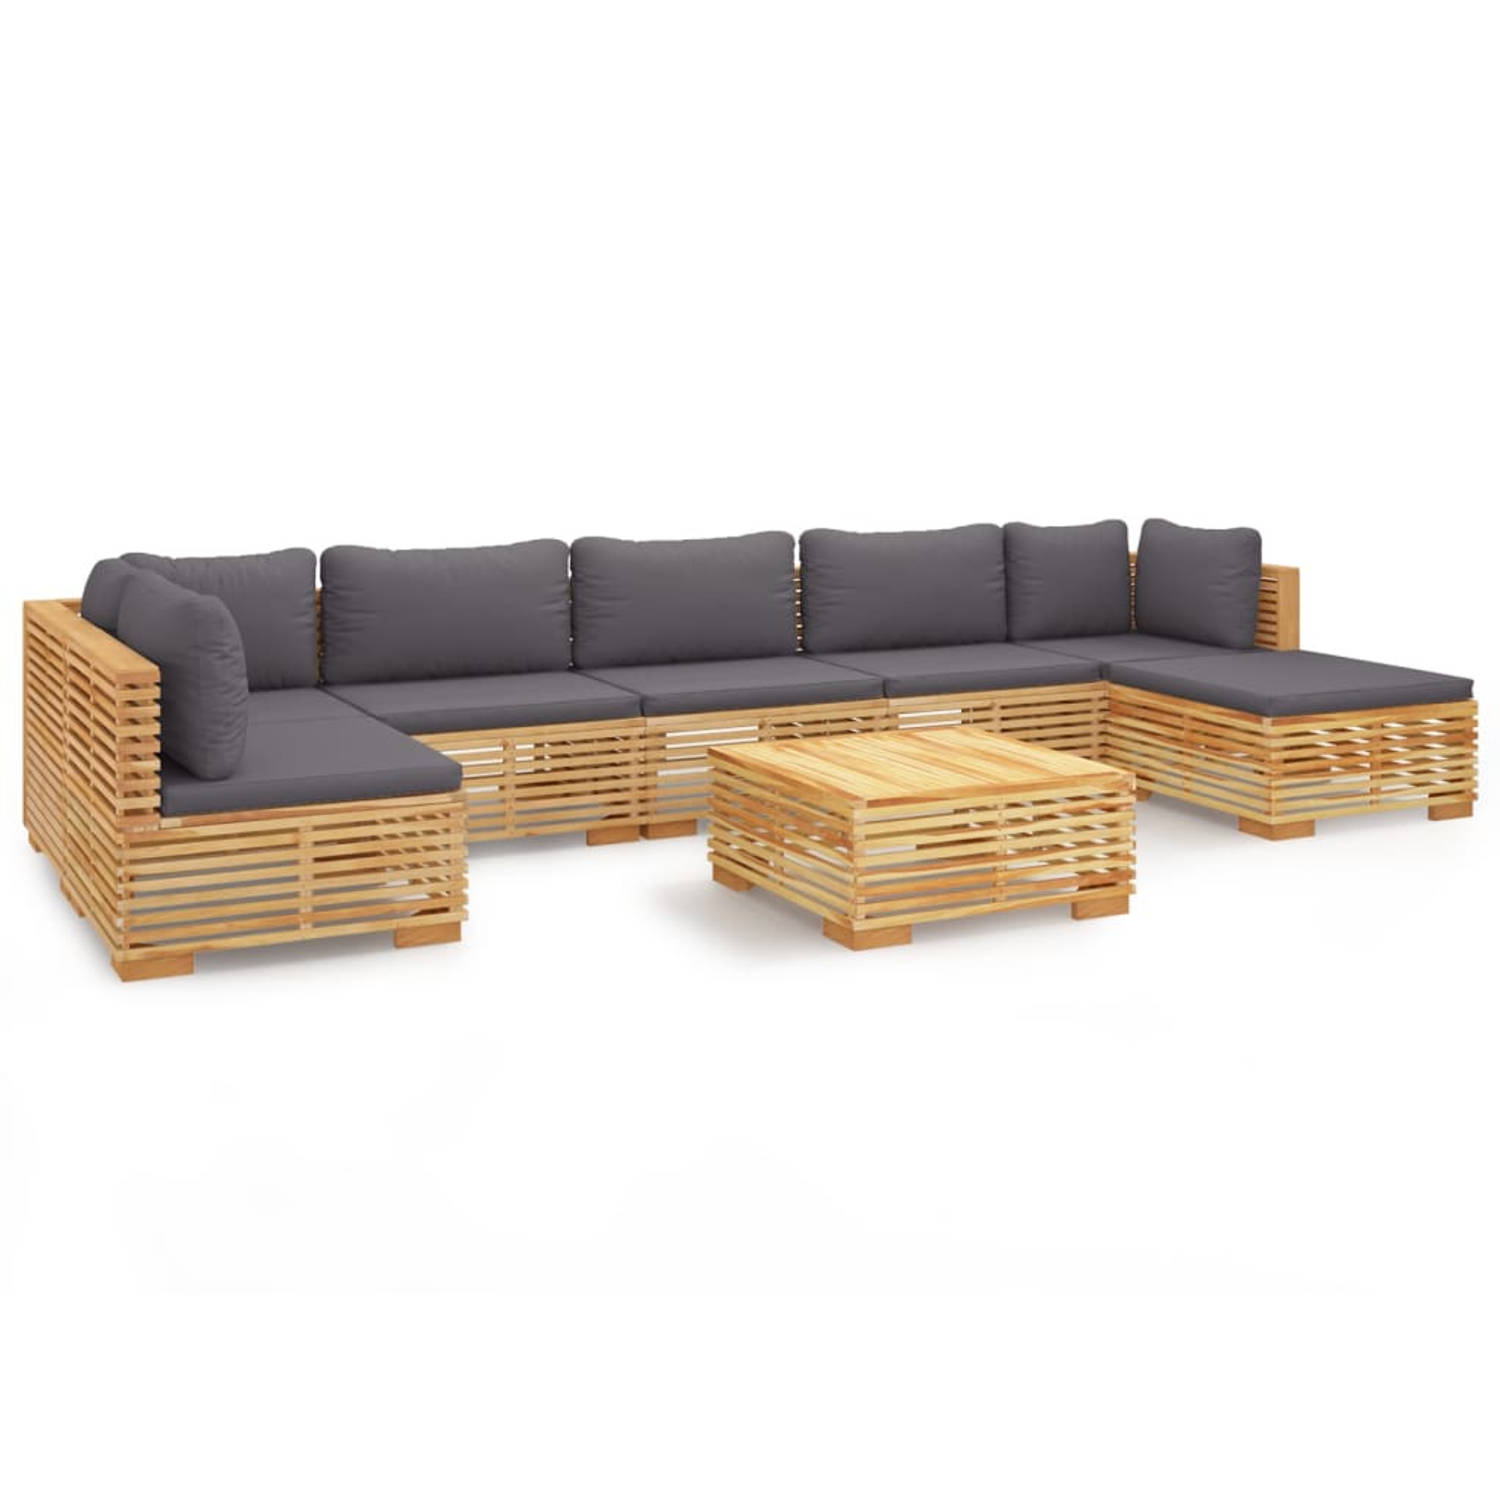 The Living Store Loungeset Teakhout Tuinmeubelen 2-persoons Donkergrijs kussen